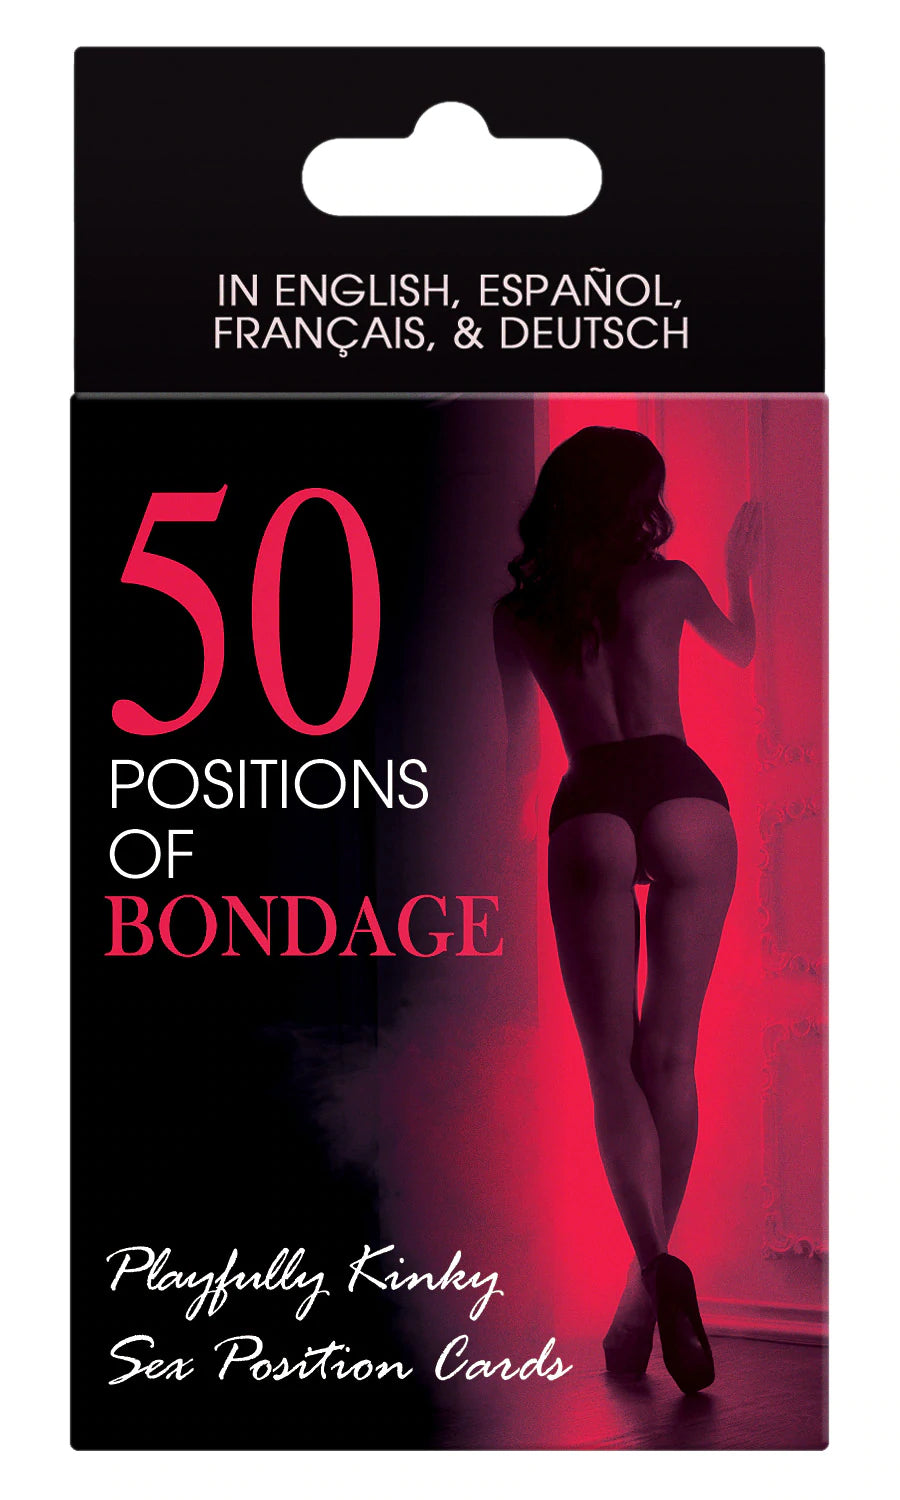 Playfully kinky sex position cards! Compete against your lover to build a five-card fantasy that includes five categories of bondage position challenges. The cards can also be used as flash cards for ideas of sex positions you can experiment with that incorporate bondage.